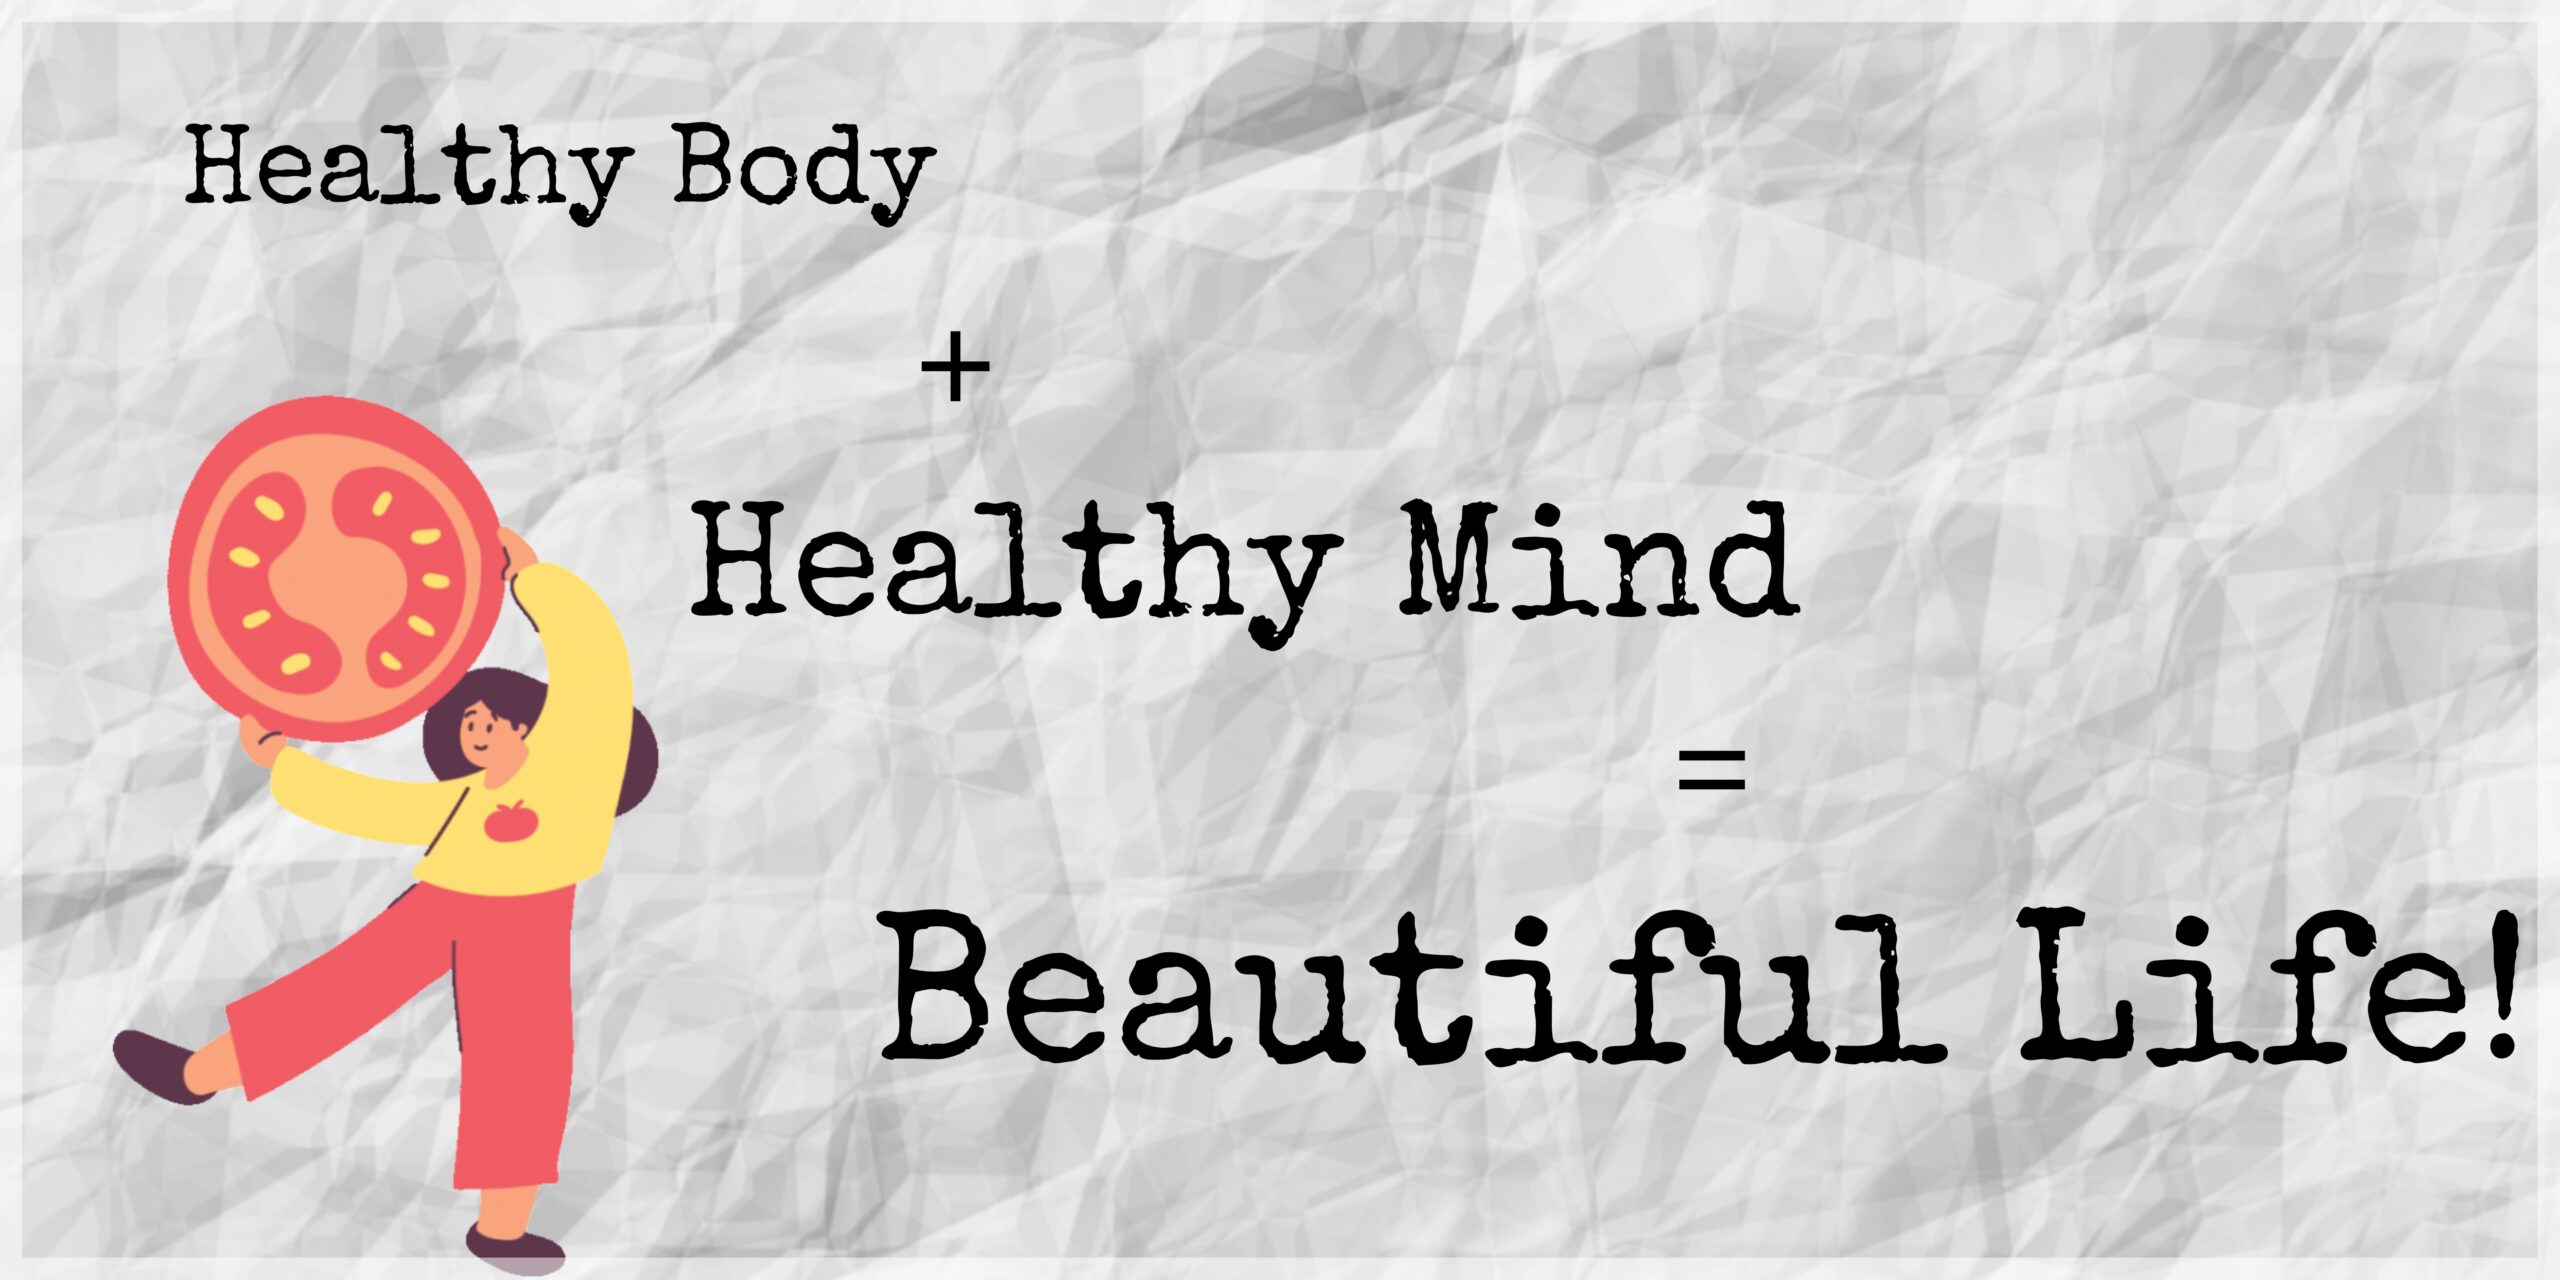 A healthy body promotes a healthy mind!